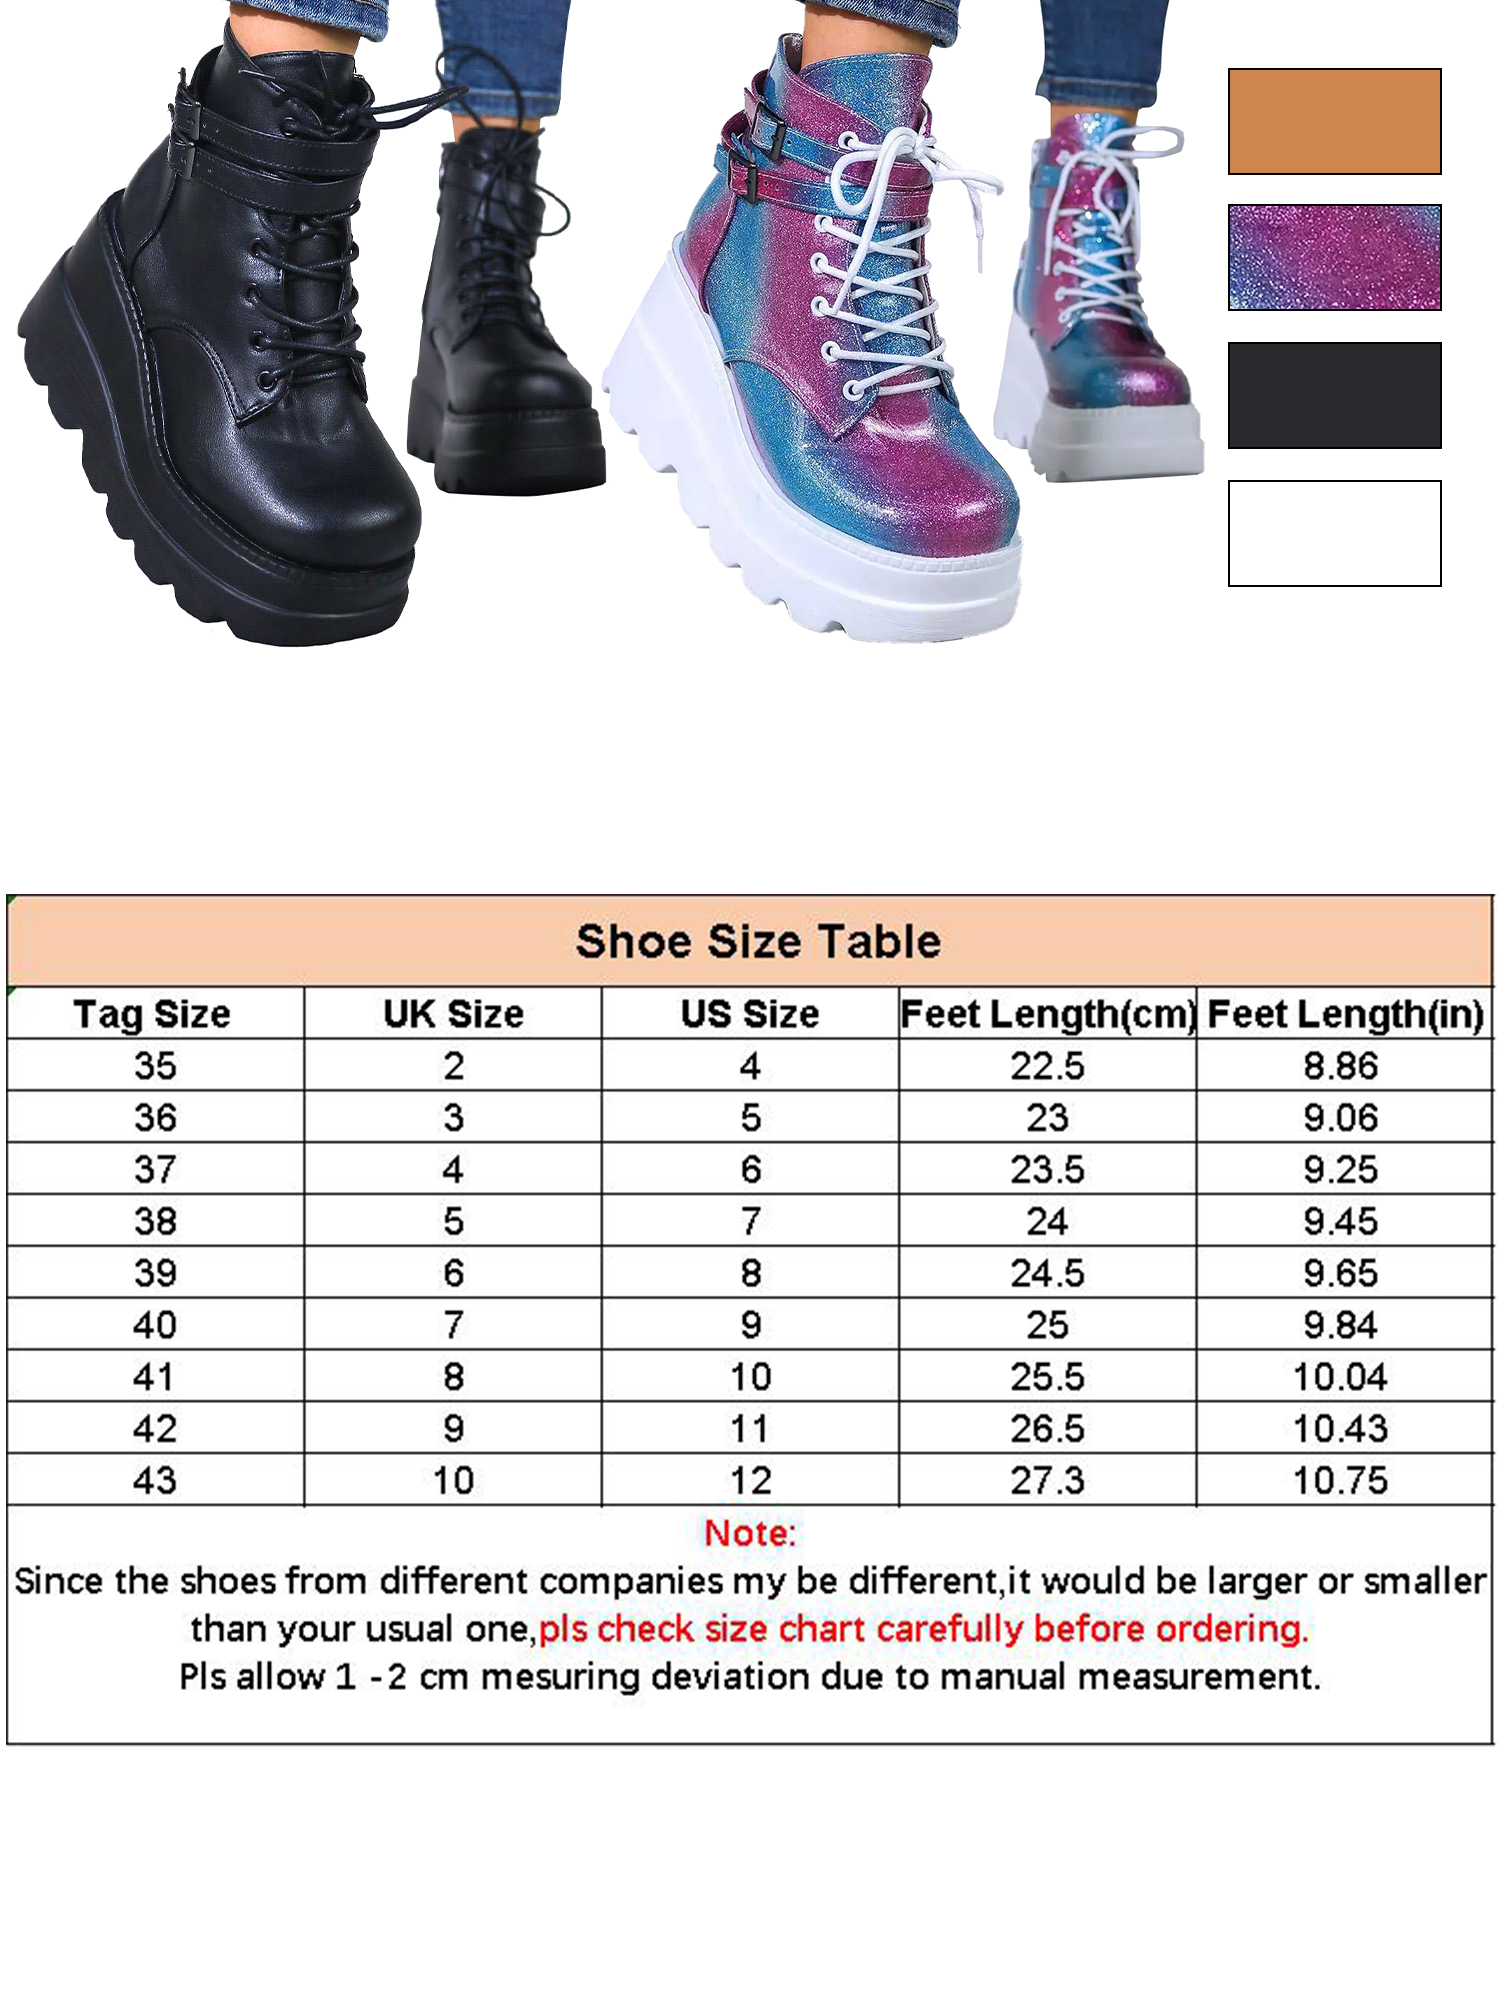 Wazshop Womens Shoes Platform Shoes Ankle Boots High Heel Shoes Round Toe Casual Shoes - image 2 of 3